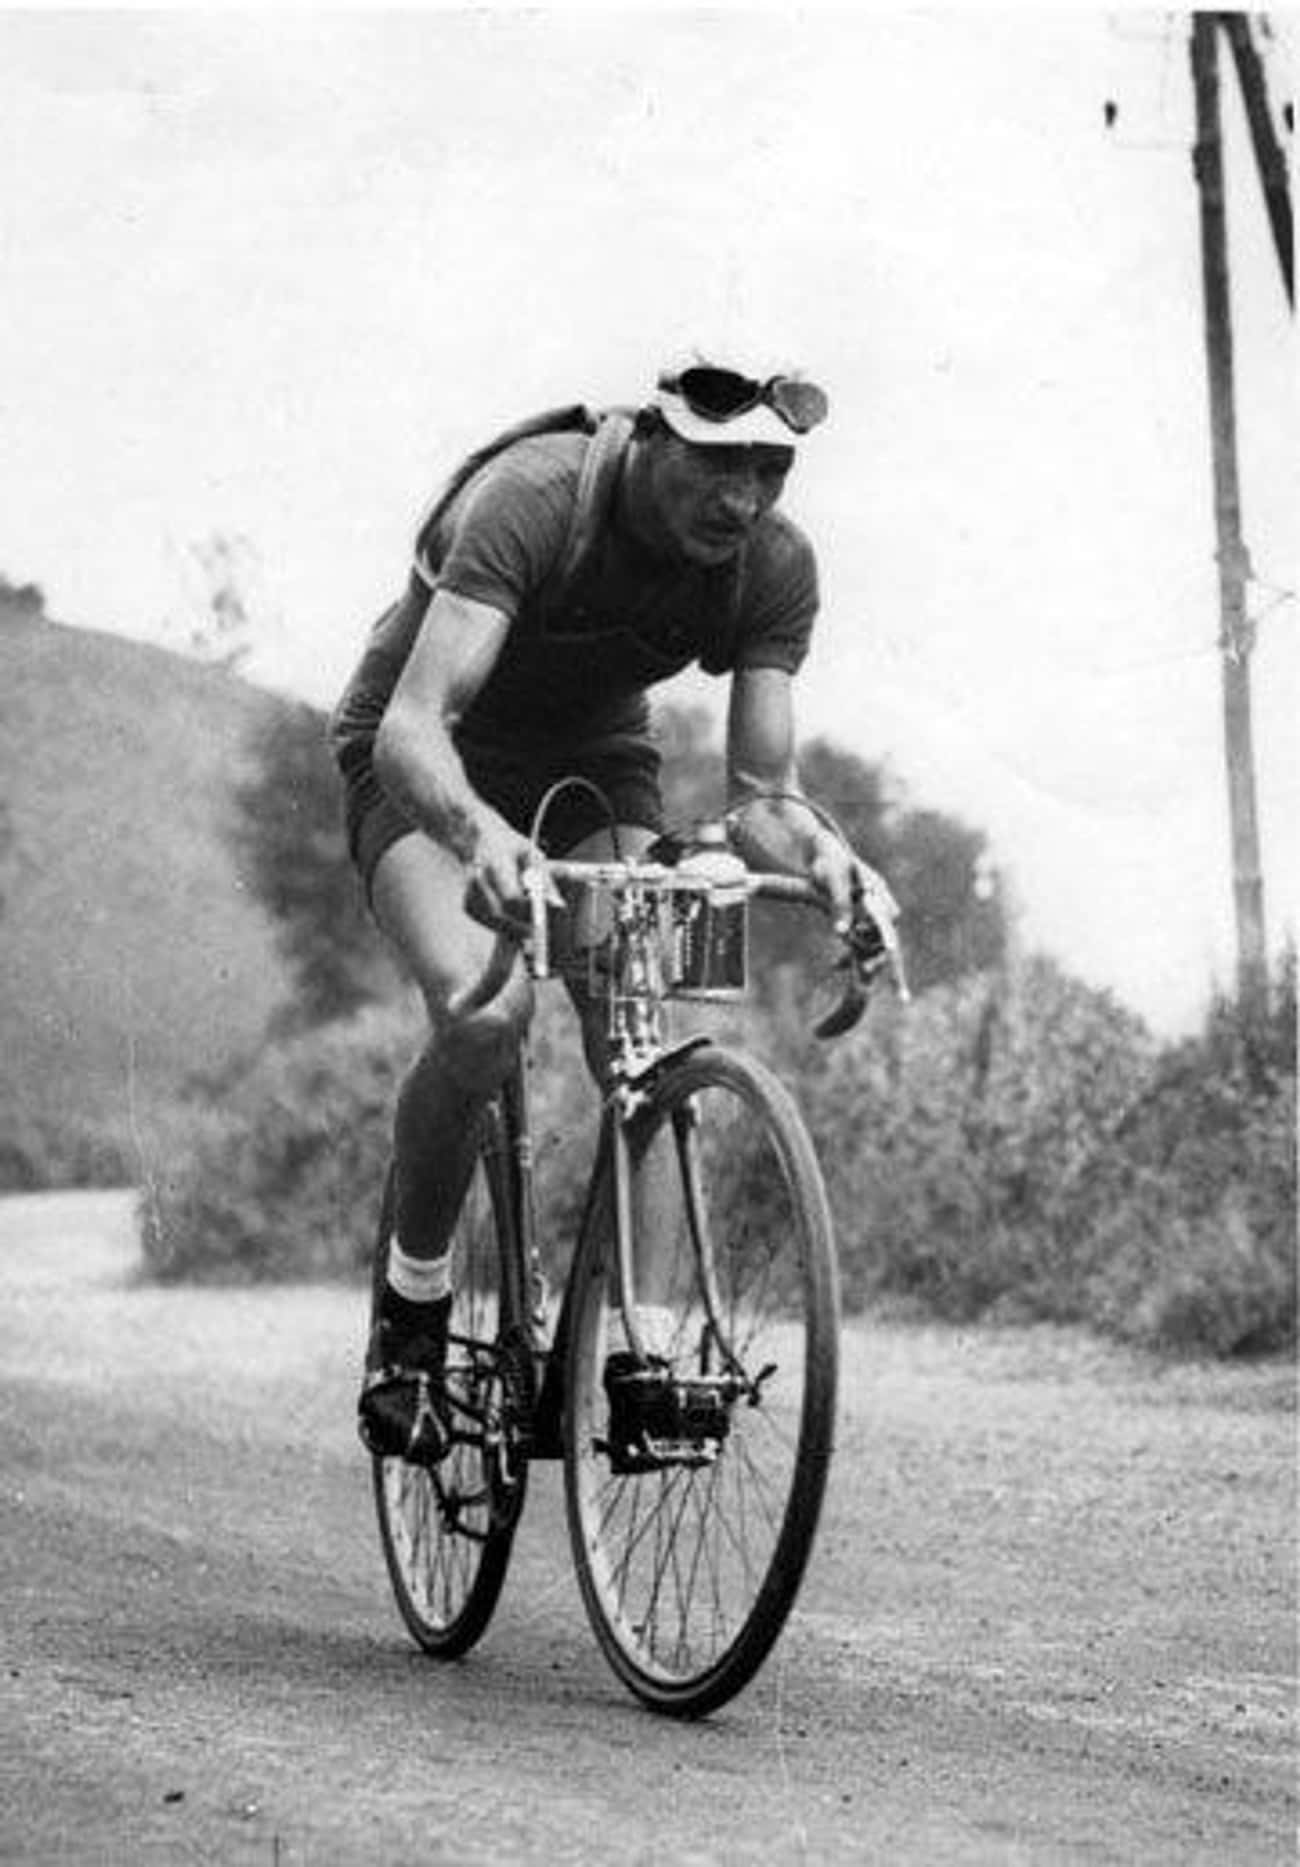 Gino Bartali Used His Cycling Fame To Transport Messages For The Italian Resistance